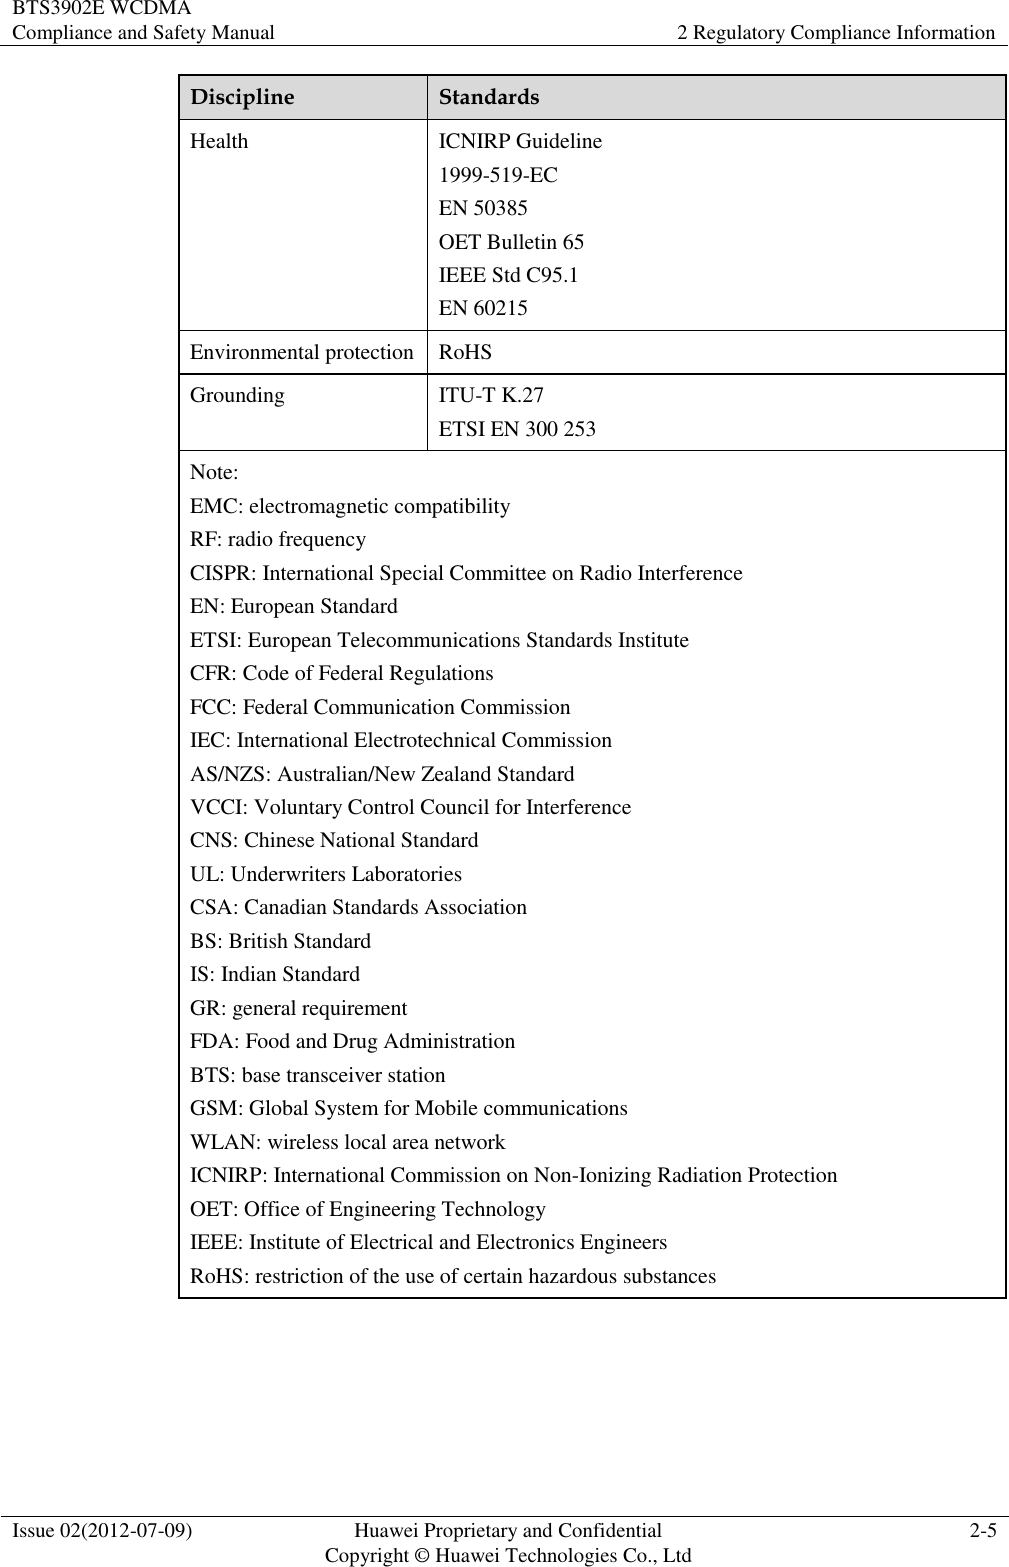 BTS3902E WCDMA Compliance and Safety Manual 2 Regulatory Compliance Information  Issue 02(2012-07-09) Huawei Proprietary and Confidential           Copyright © Huawei Technologies Co., Ltd 2-5  Discipline Standards Health ICNIRP Guideline 1999-519-EC EN 50385 OET Bulletin 65 IEEE Std C95.1 EN 60215 Environmental protection RoHS Grounding ITU-T K.27 ETSI EN 300 253 Note: EMC: electromagnetic compatibility RF: radio frequency CISPR: International Special Committee on Radio Interference EN: European Standard ETSI: European Telecommunications Standards Institute CFR: Code of Federal Regulations FCC: Federal Communication Commission IEC: International Electrotechnical Commission AS/NZS: Australian/New Zealand Standard VCCI: Voluntary Control Council for Interference CNS: Chinese National Standard UL: Underwriters Laboratories CSA: Canadian Standards Association BS: British Standard IS: Indian Standard GR: general requirement FDA: Food and Drug Administration BTS: base transceiver station GSM: Global System for Mobile communications WLAN: wireless local area network ICNIRP: International Commission on Non-Ionizing Radiation Protection OET: Office of Engineering Technology IEEE: Institute of Electrical and Electronics Engineers RoHS: restriction of the use of certain hazardous substances  